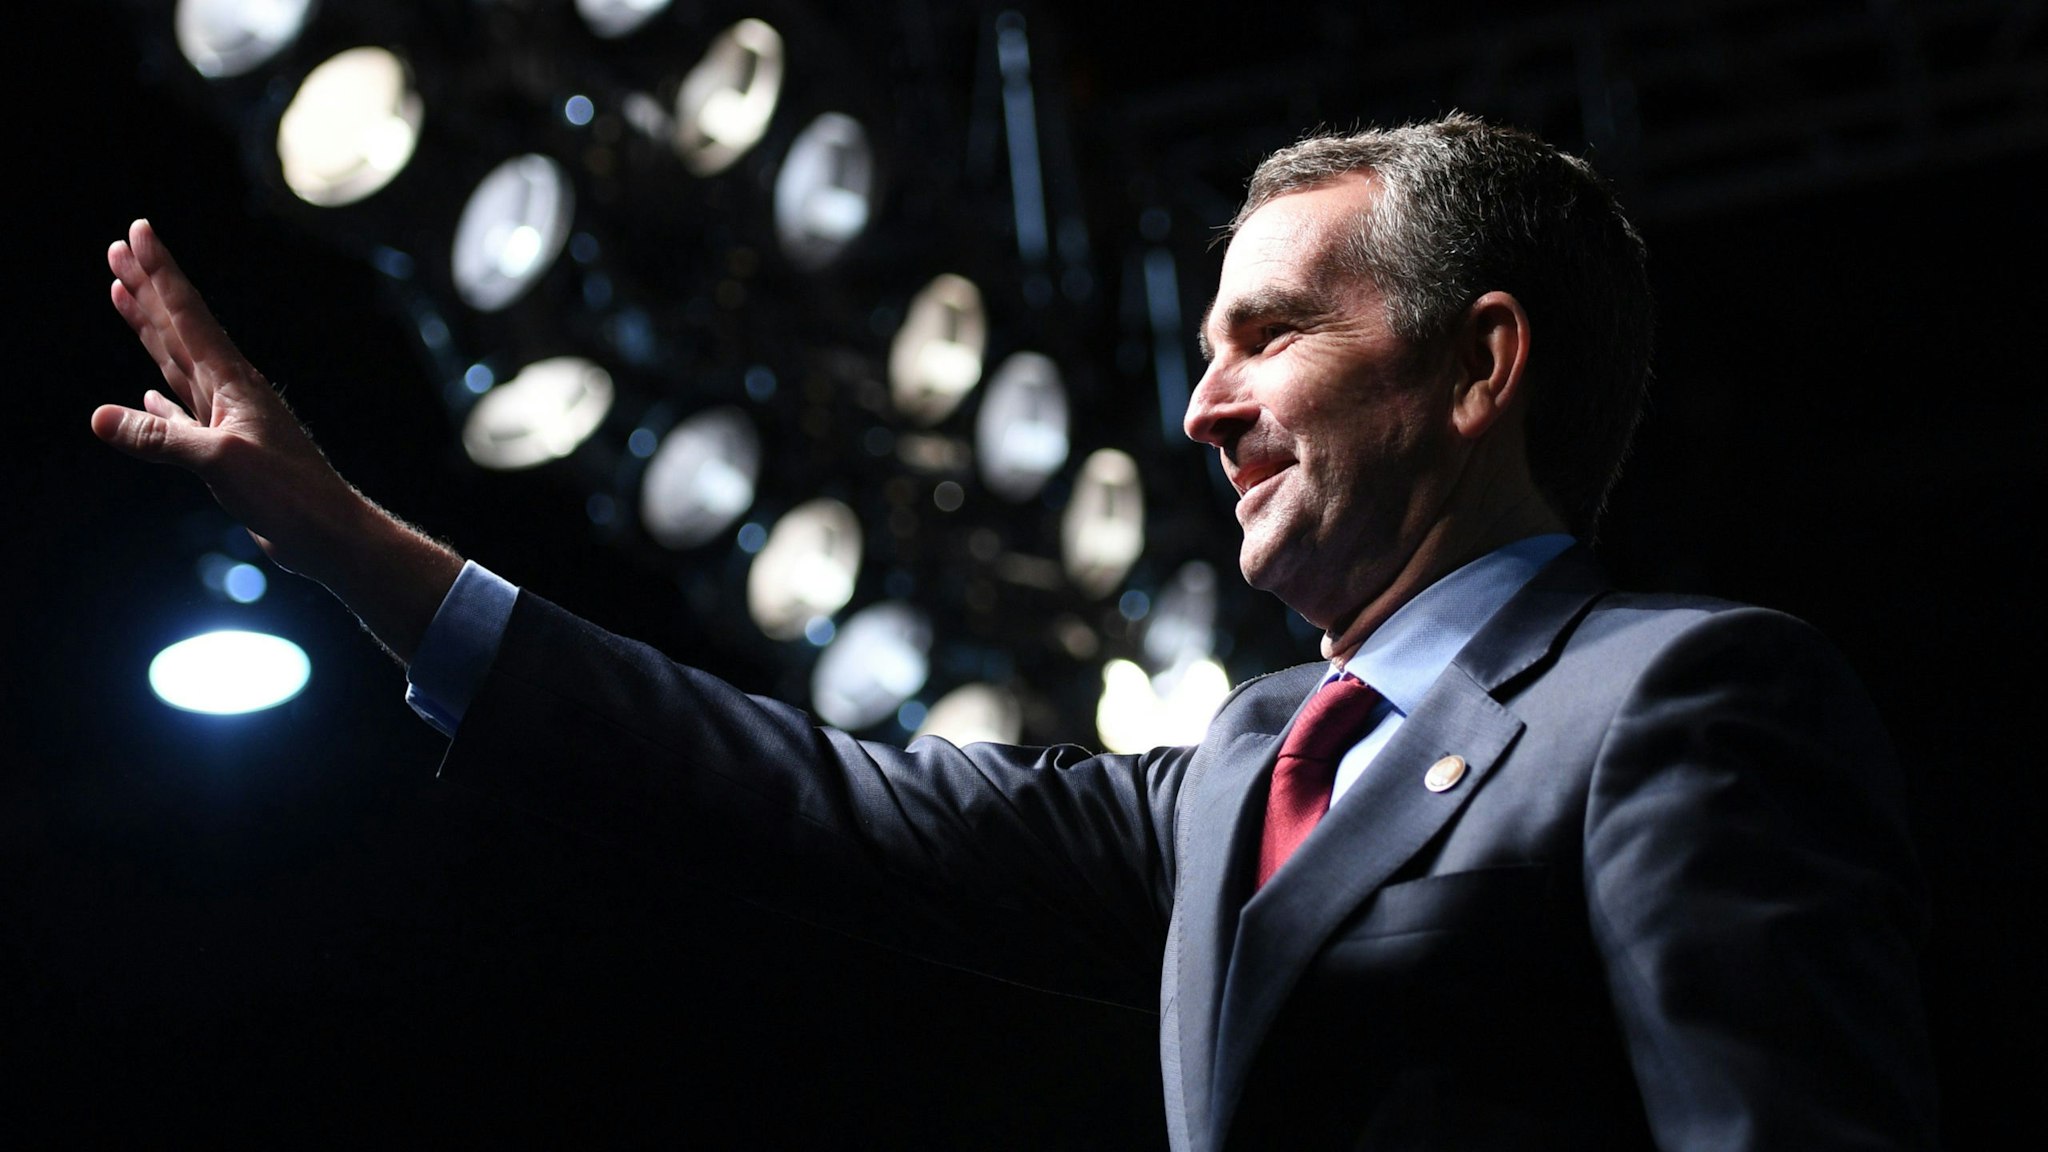 Democratic Gubernatorial Candidate Ralph Northam waves as he arrives to speak during a campaign rally in Richmond, Virginia on October 19, 2017.